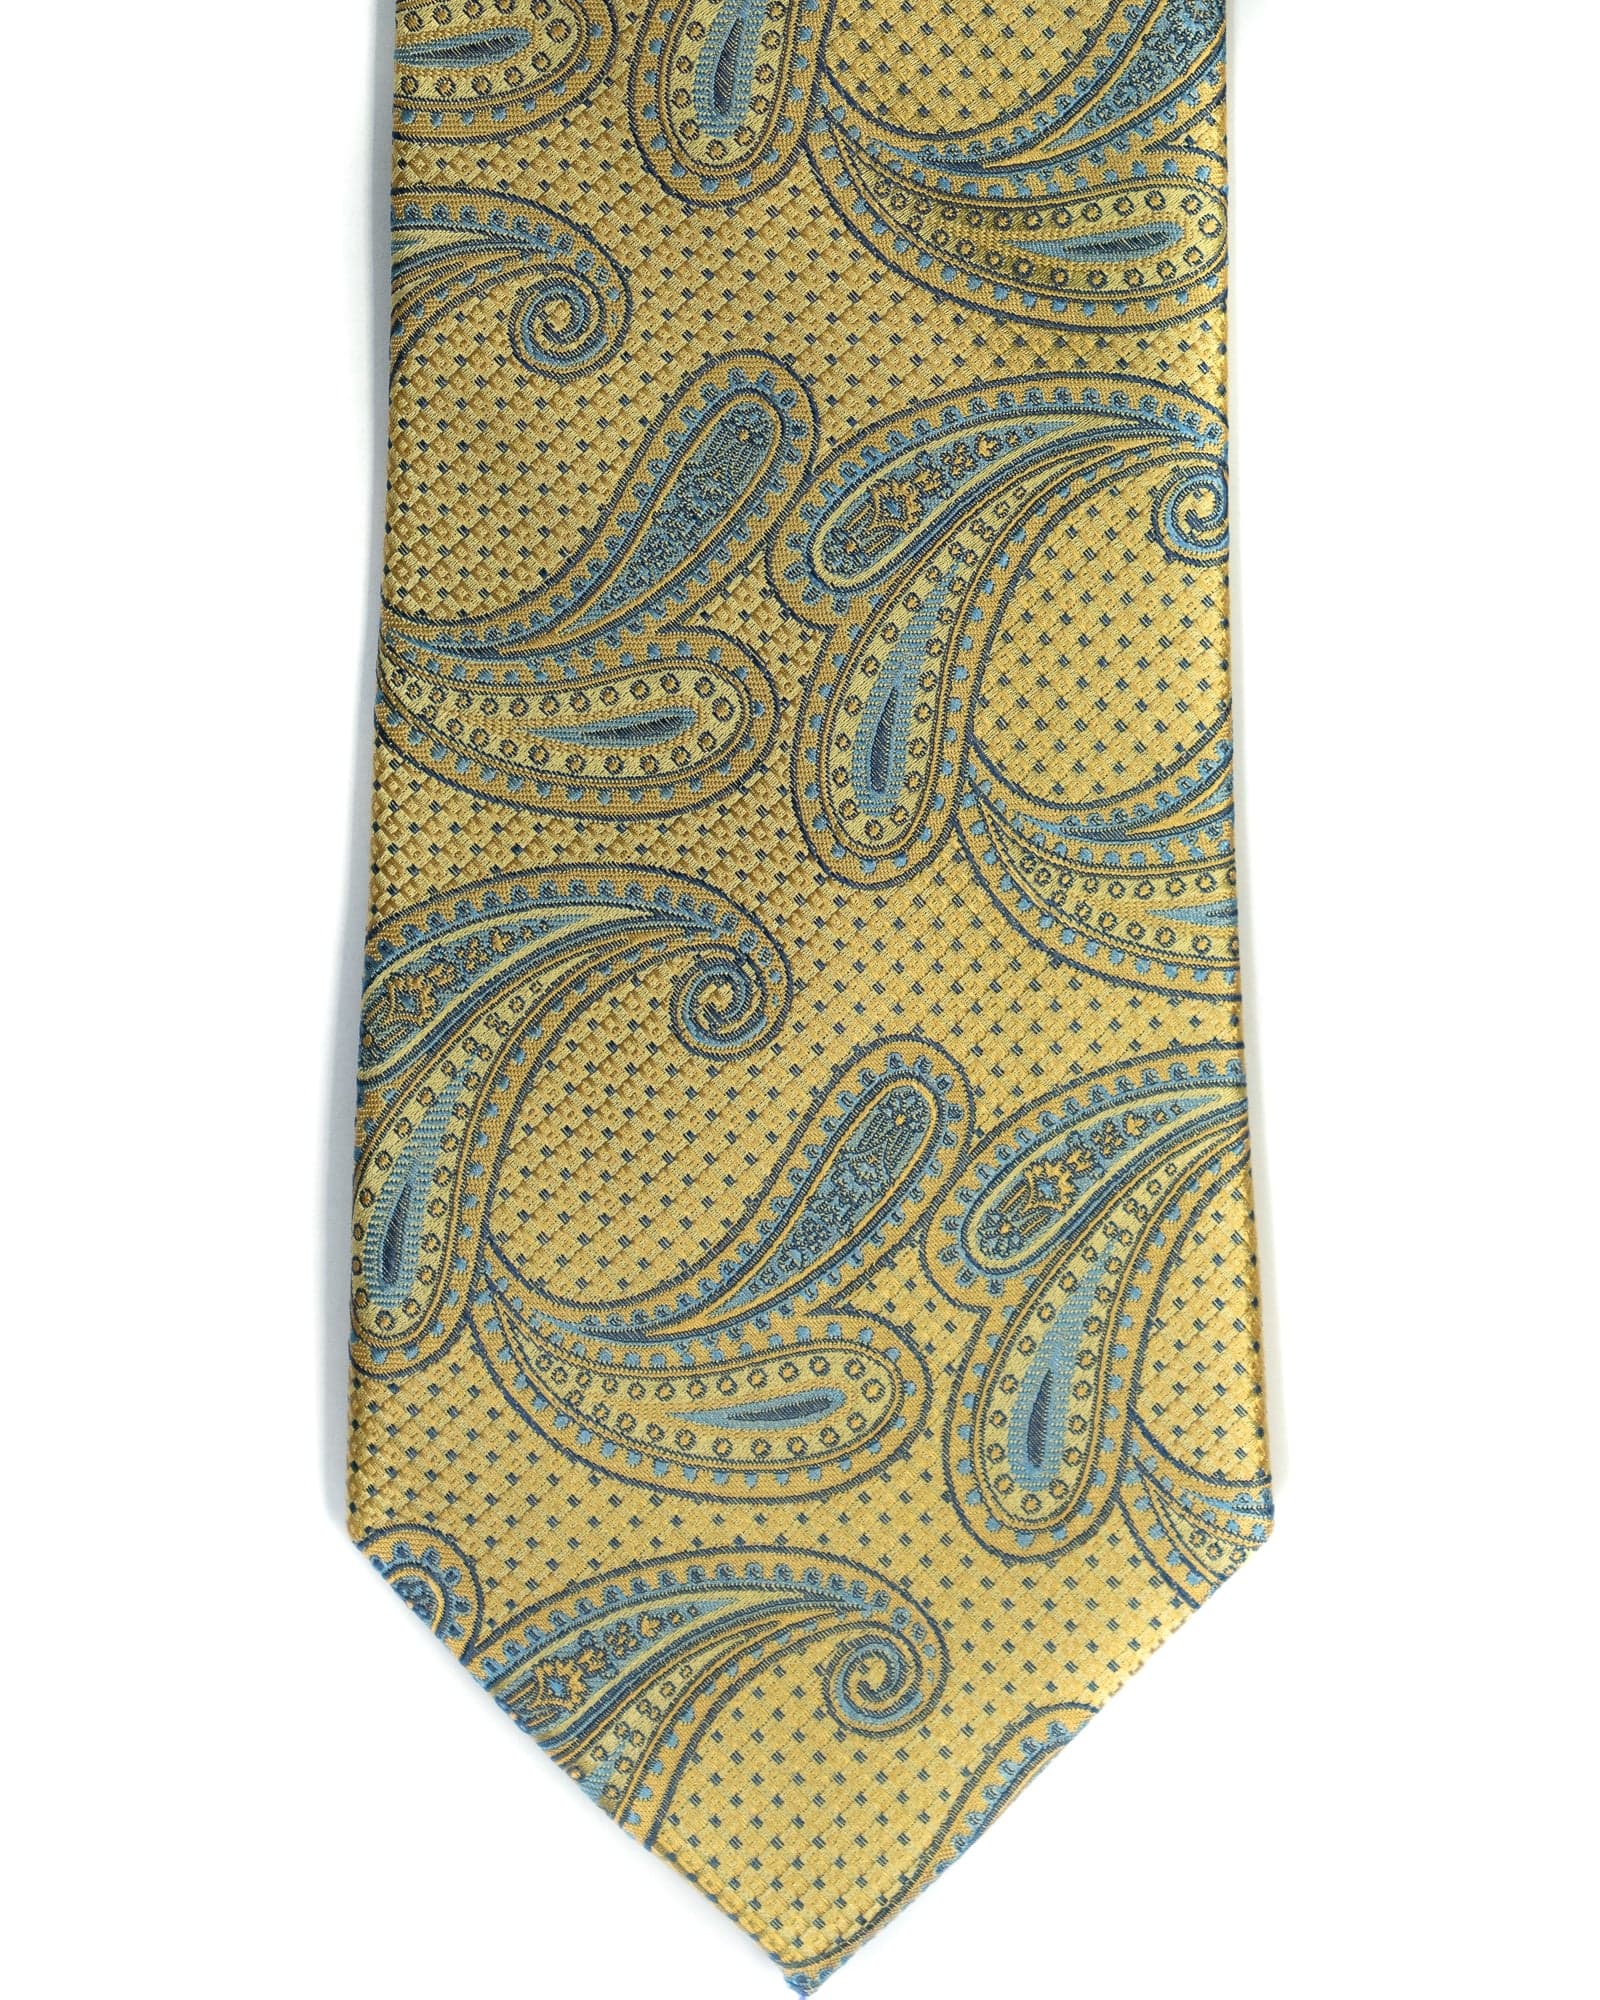 Paisley Silk Tie in Yellow With Light Blue - Rainwater's Men's Clothing and Tuxedo Rental